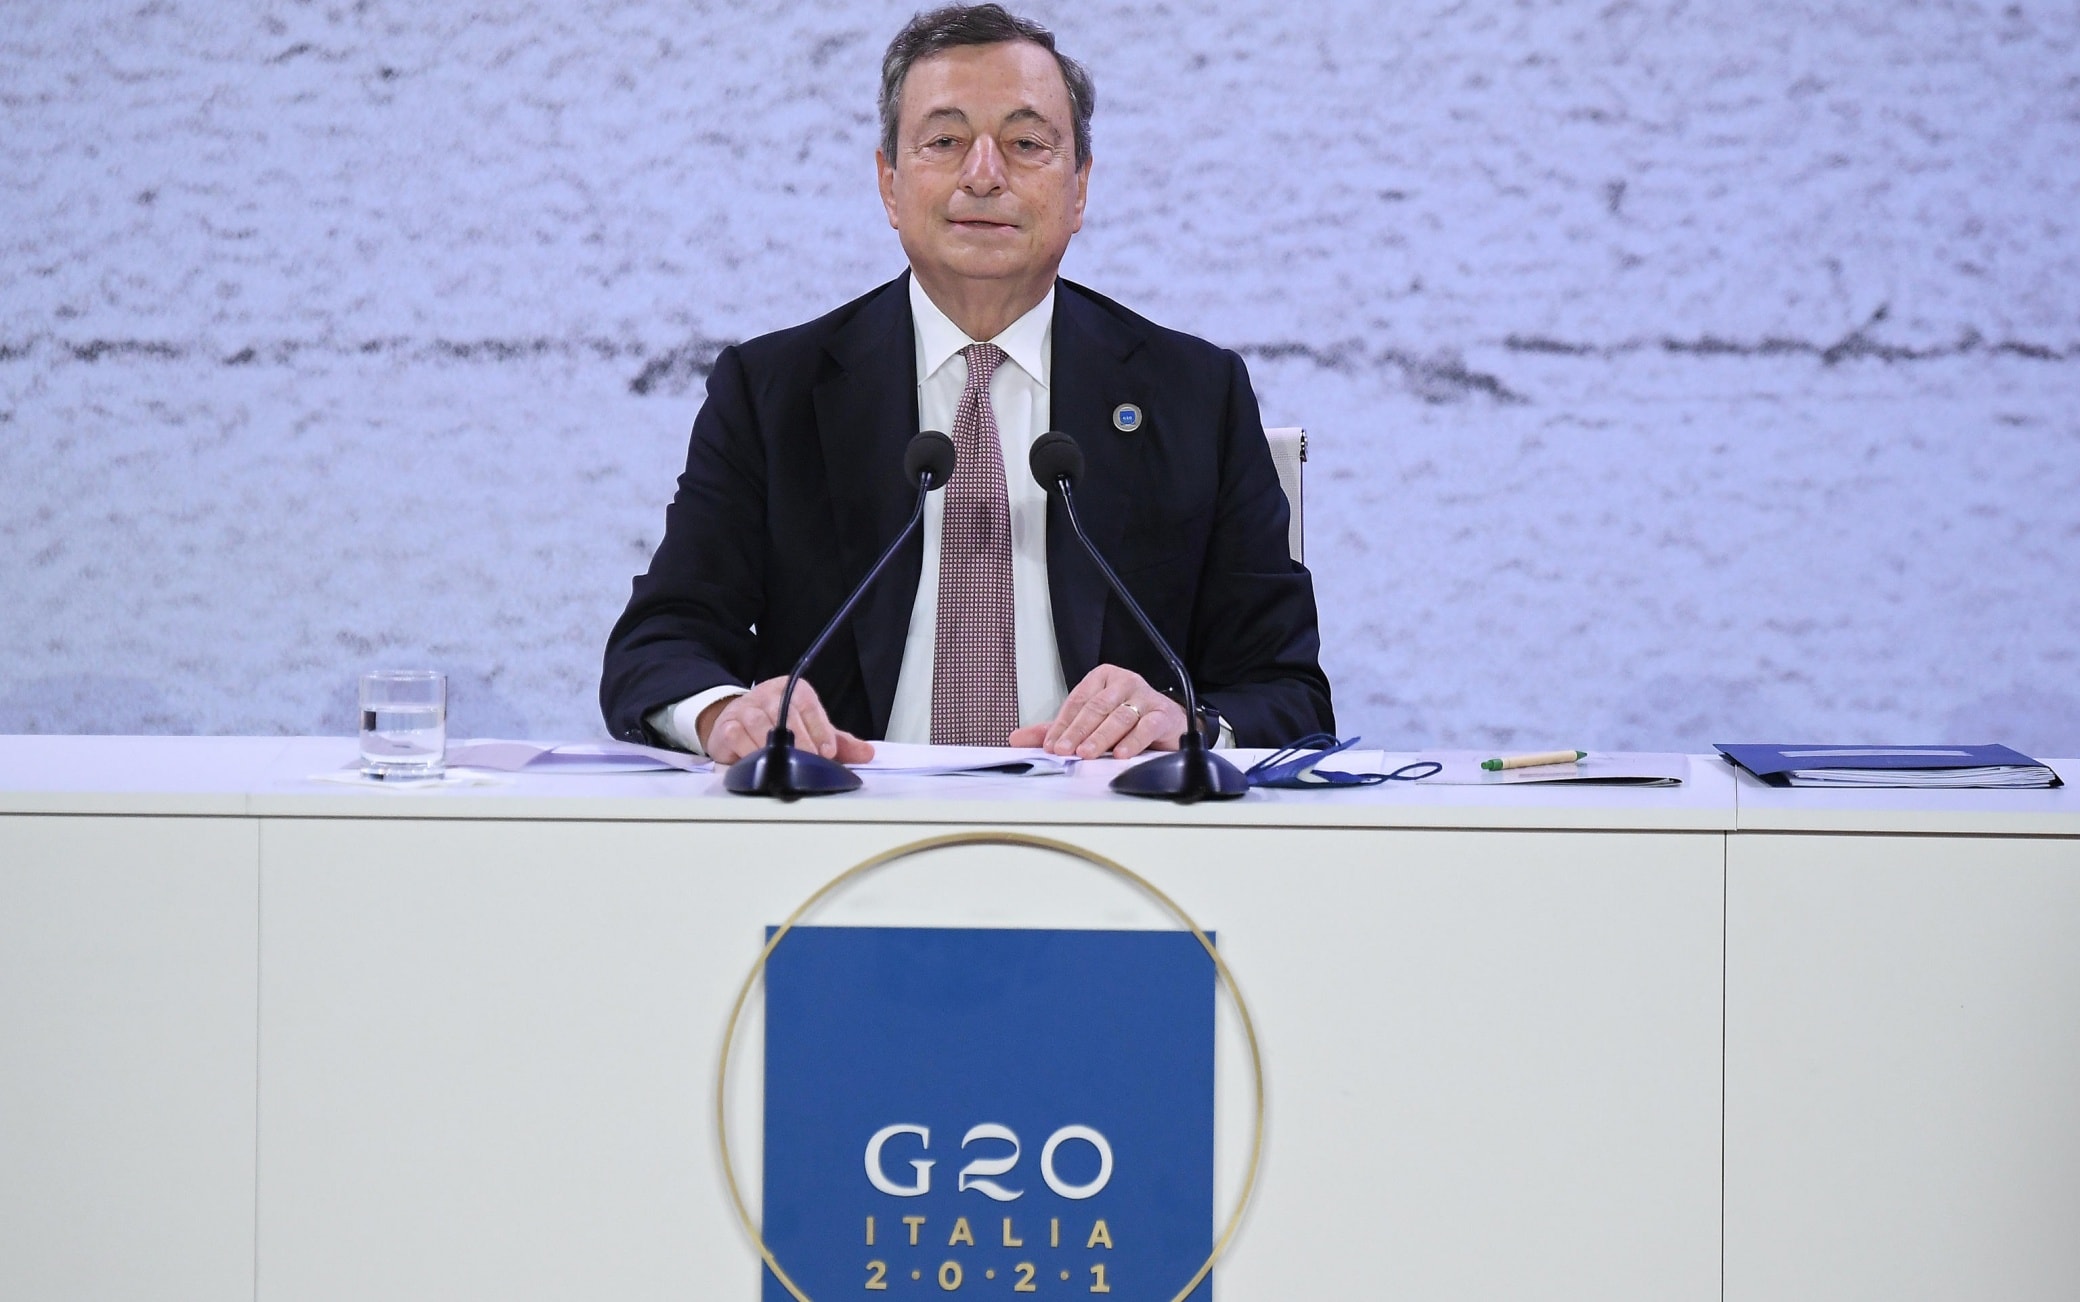 G20, Draghi quotes Greta on climate: “The summit filled the bla bla bla with substance”